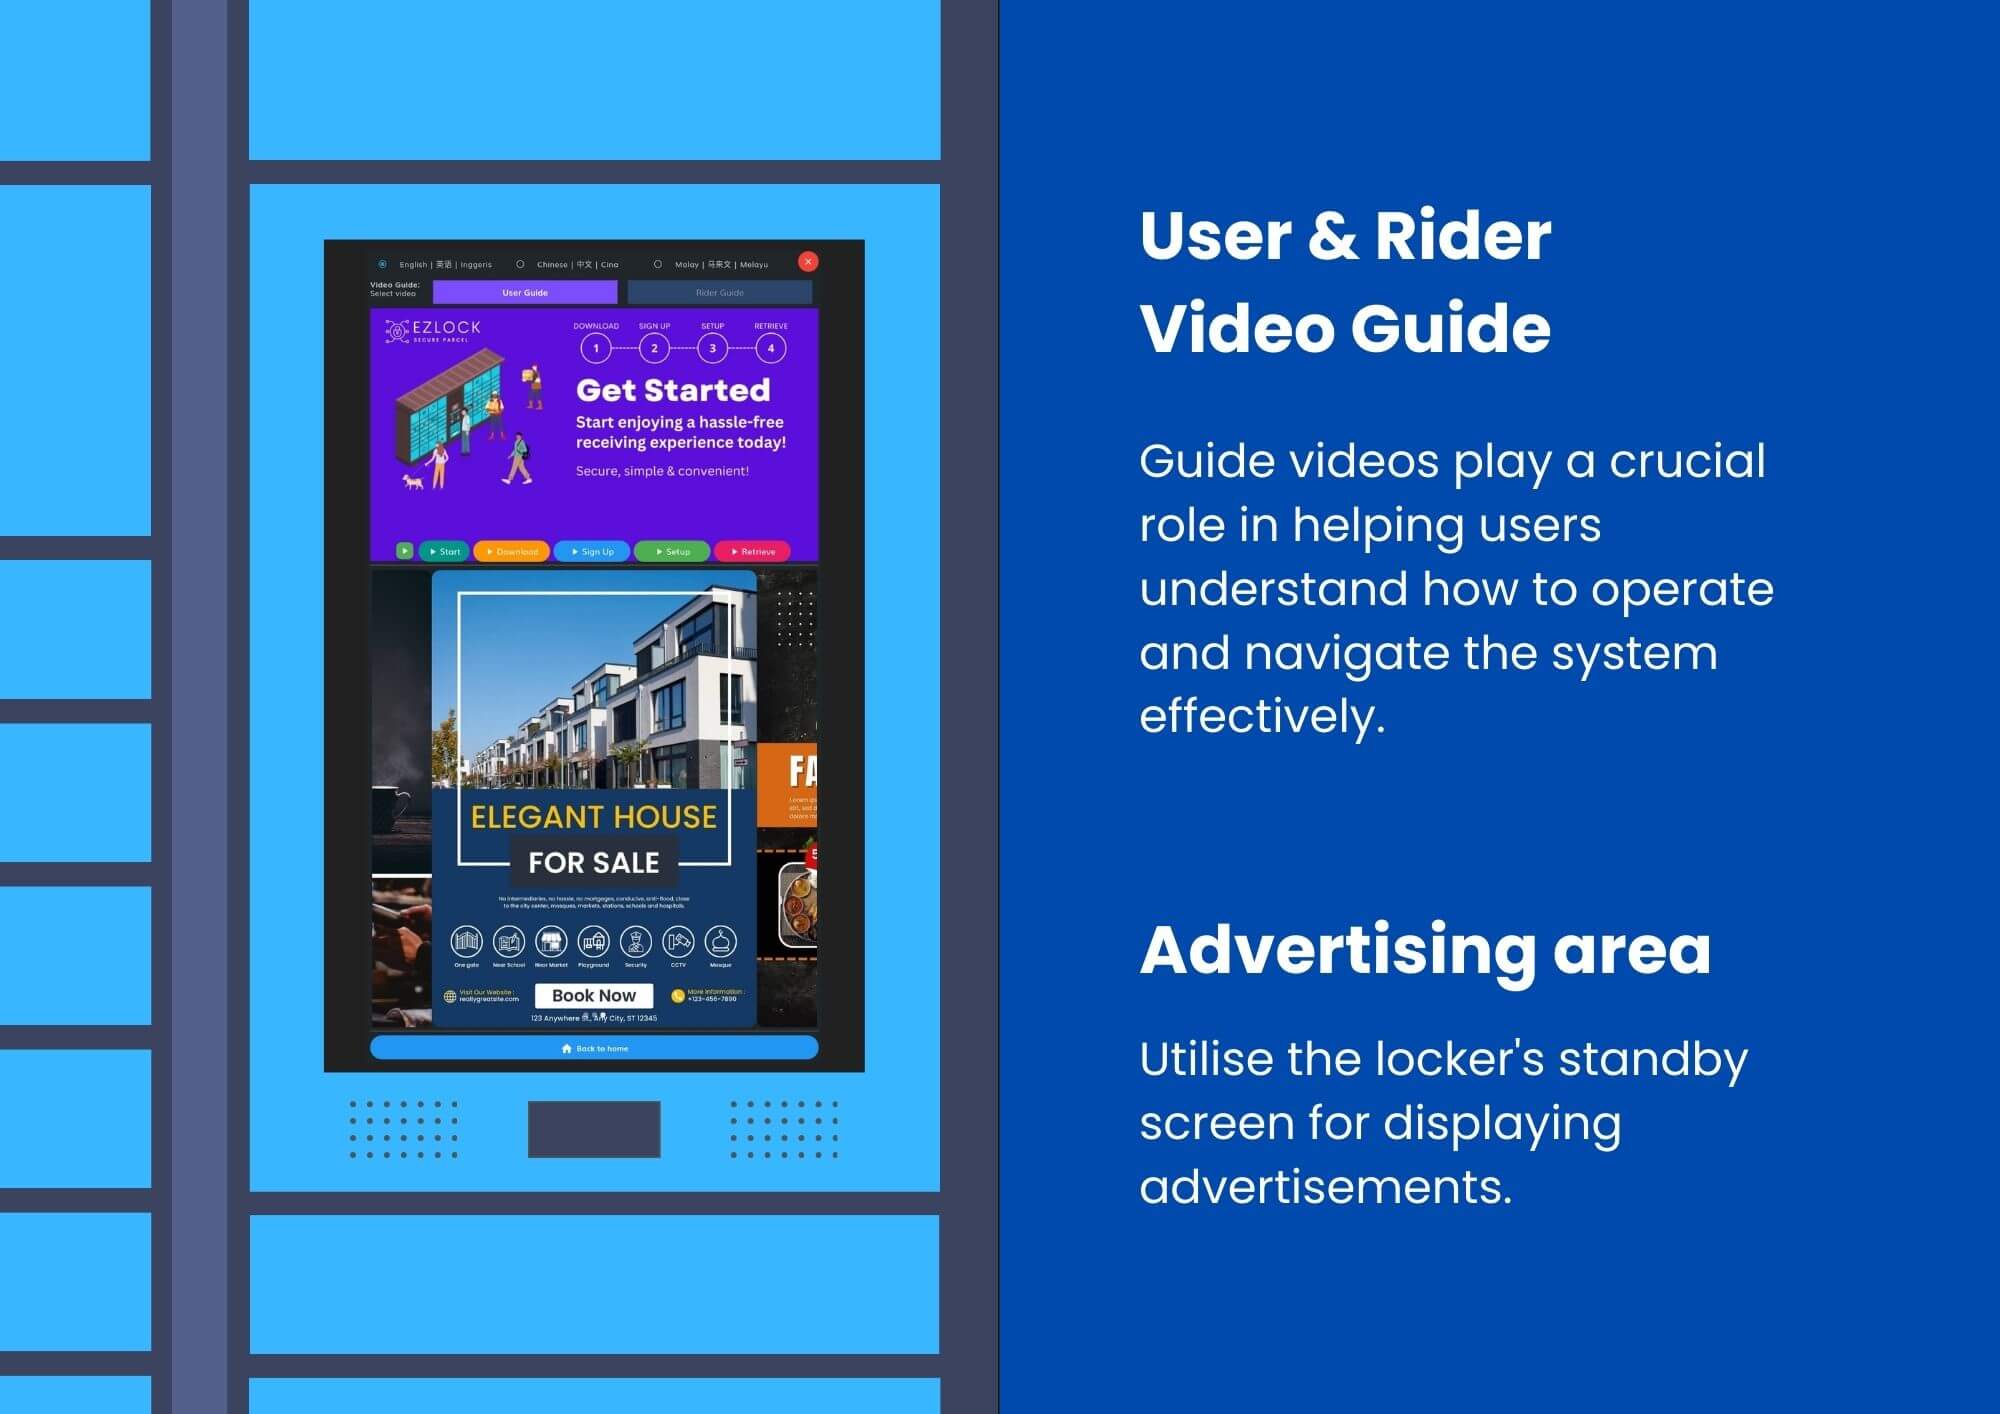 ezlock user and rider guide video, advertisement system